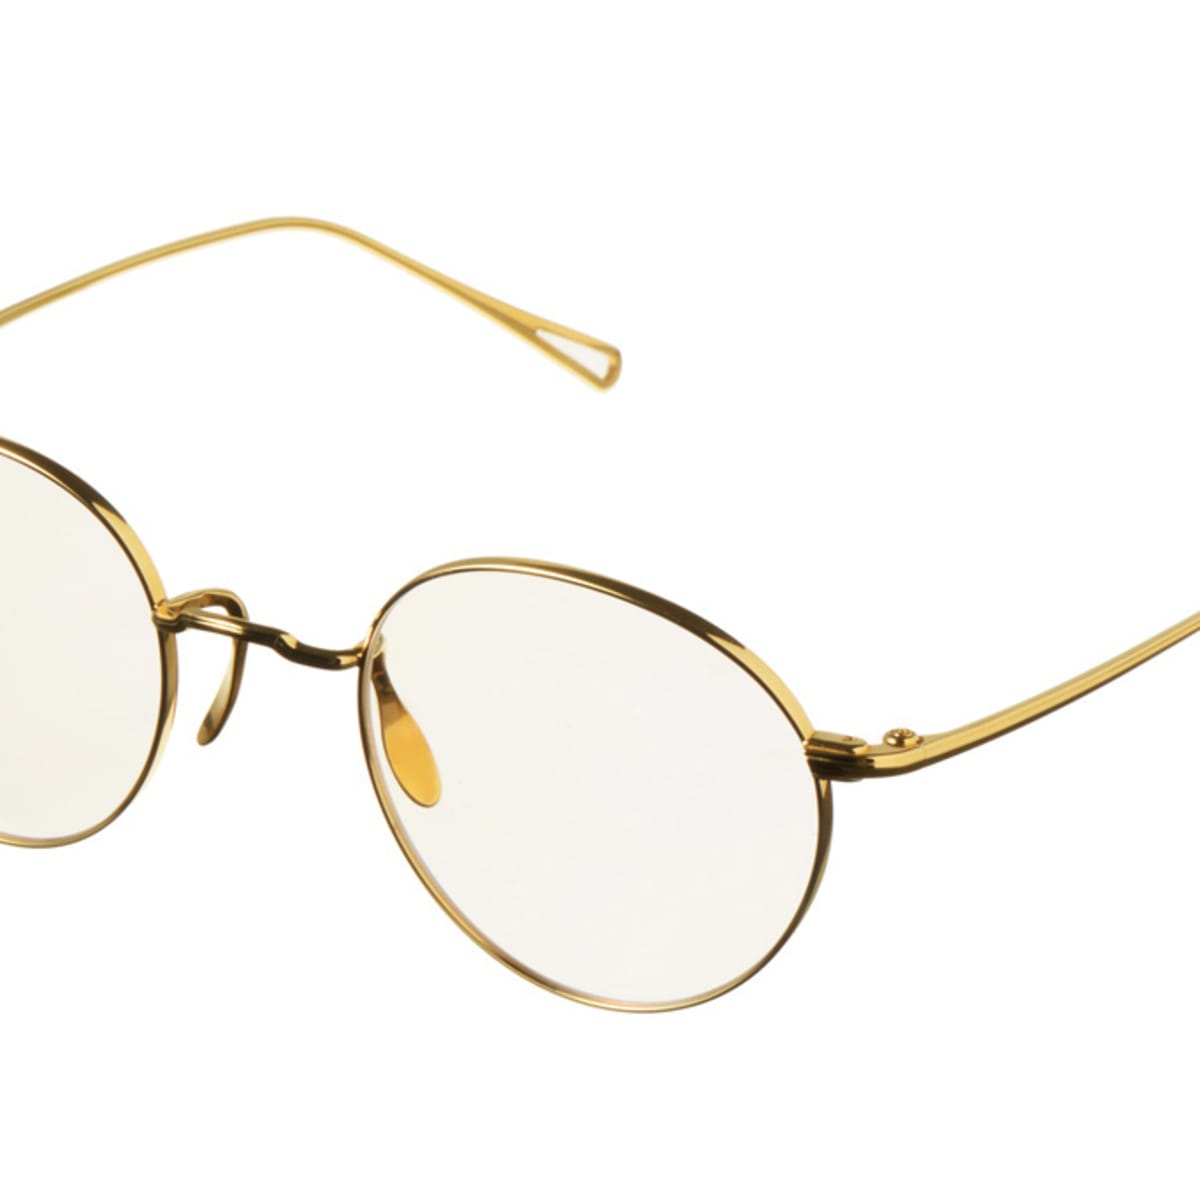 Luxuriously lightweight, Ayame's all-metal eyewear - Acquire